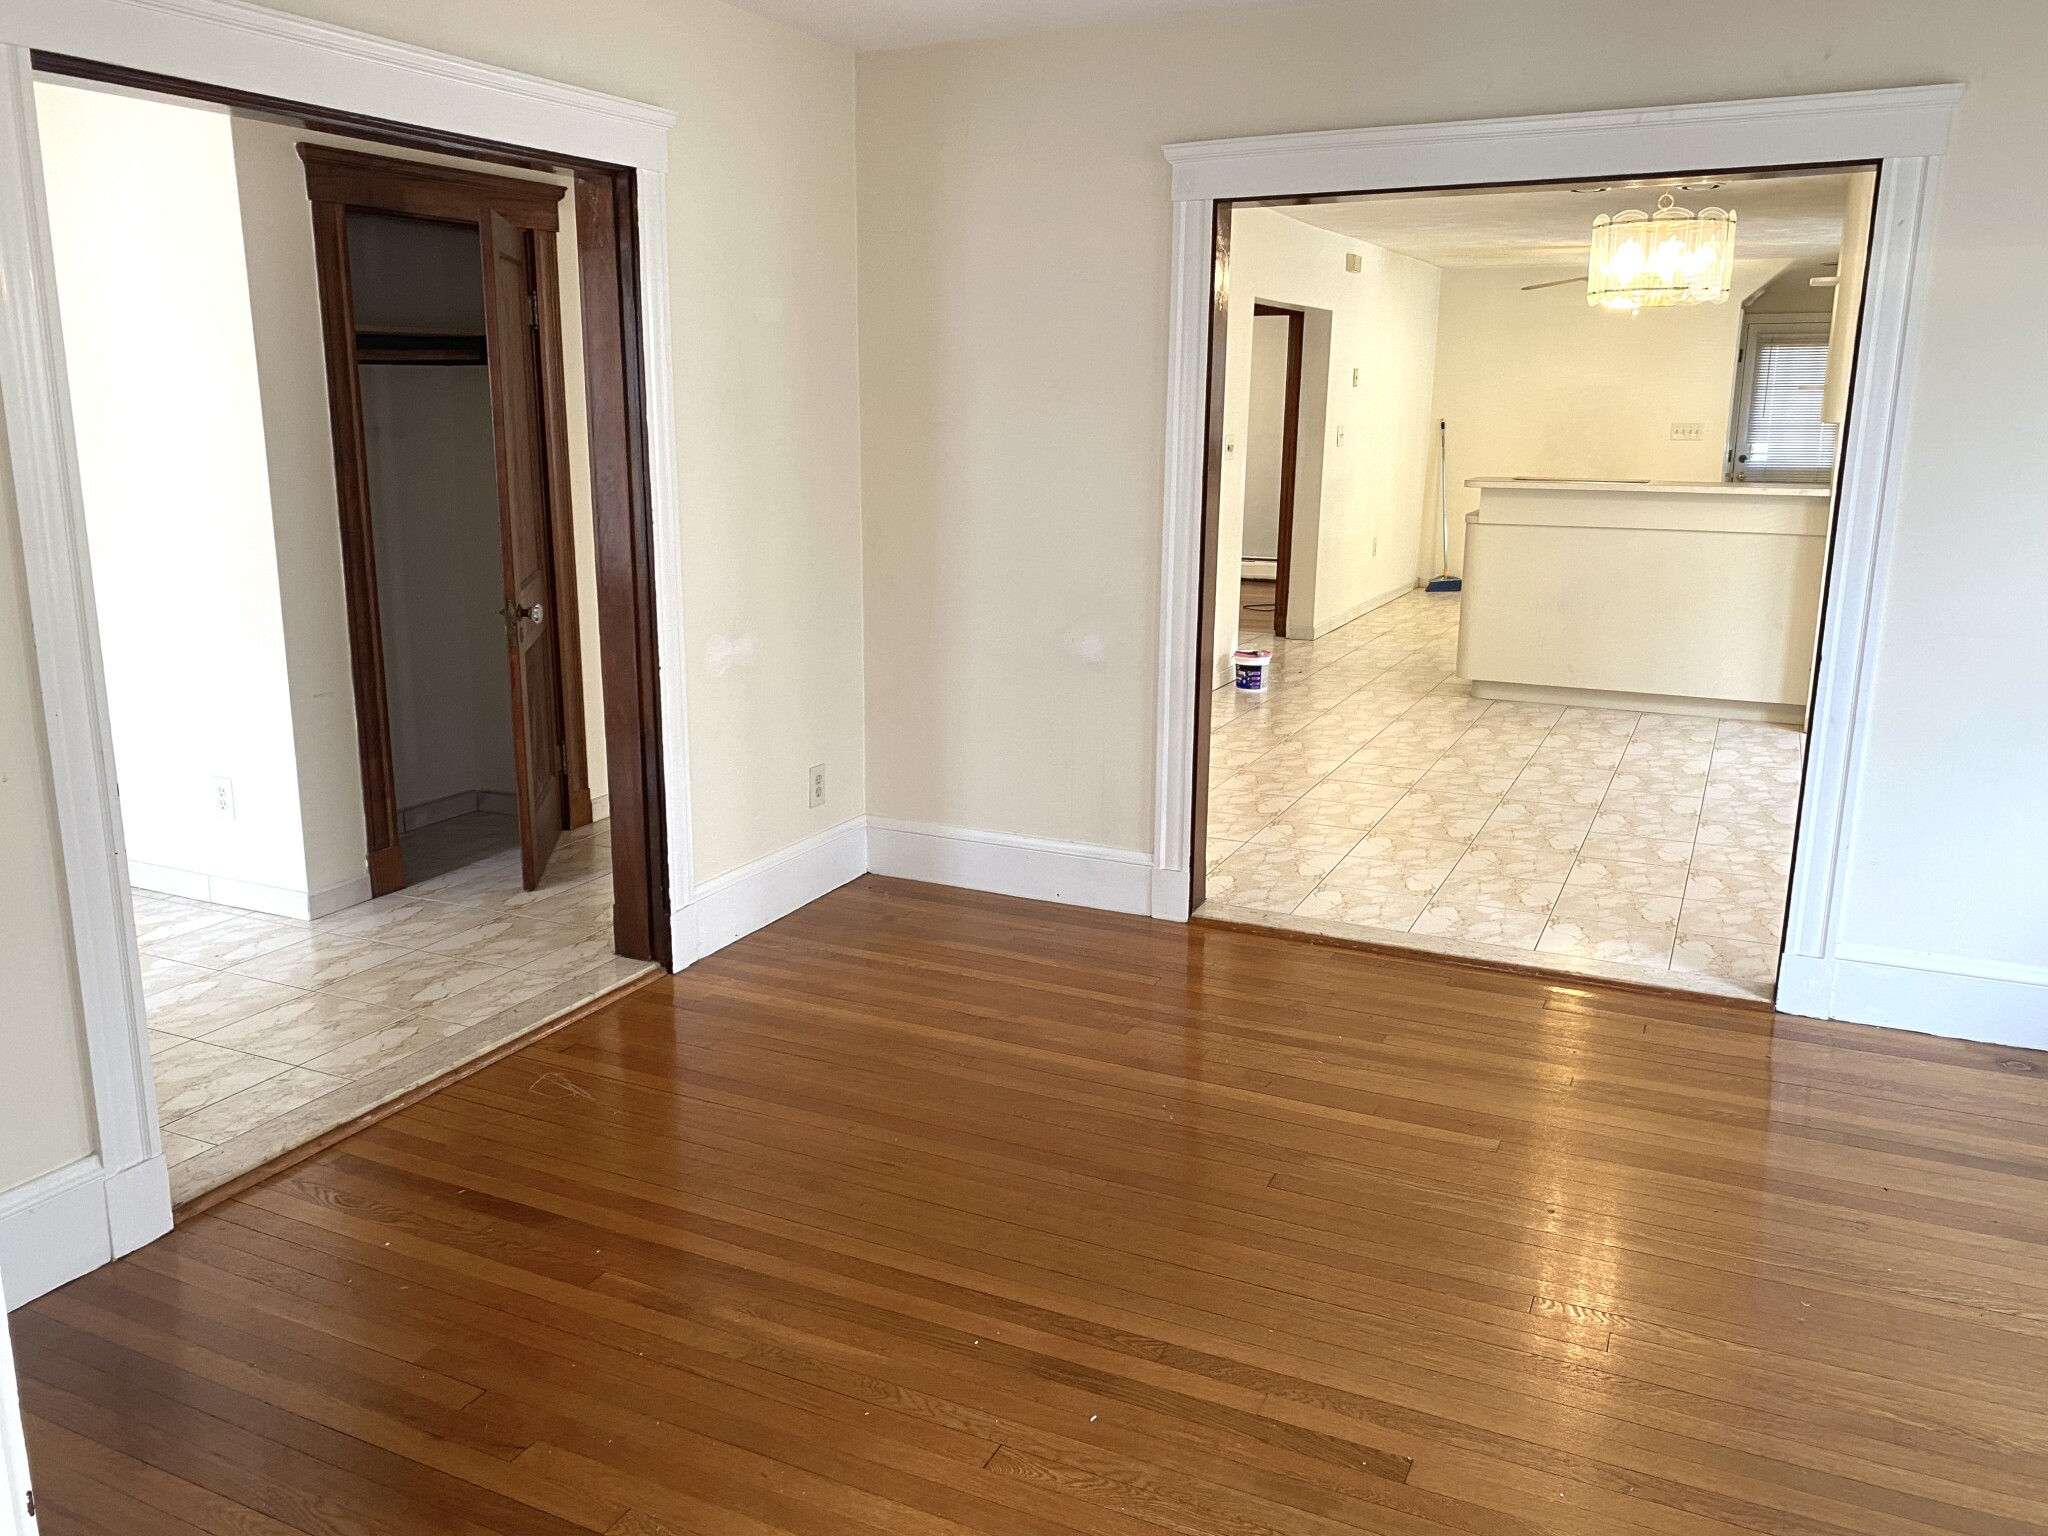 Photos of apartment on Valley St.,Medford MA 02155